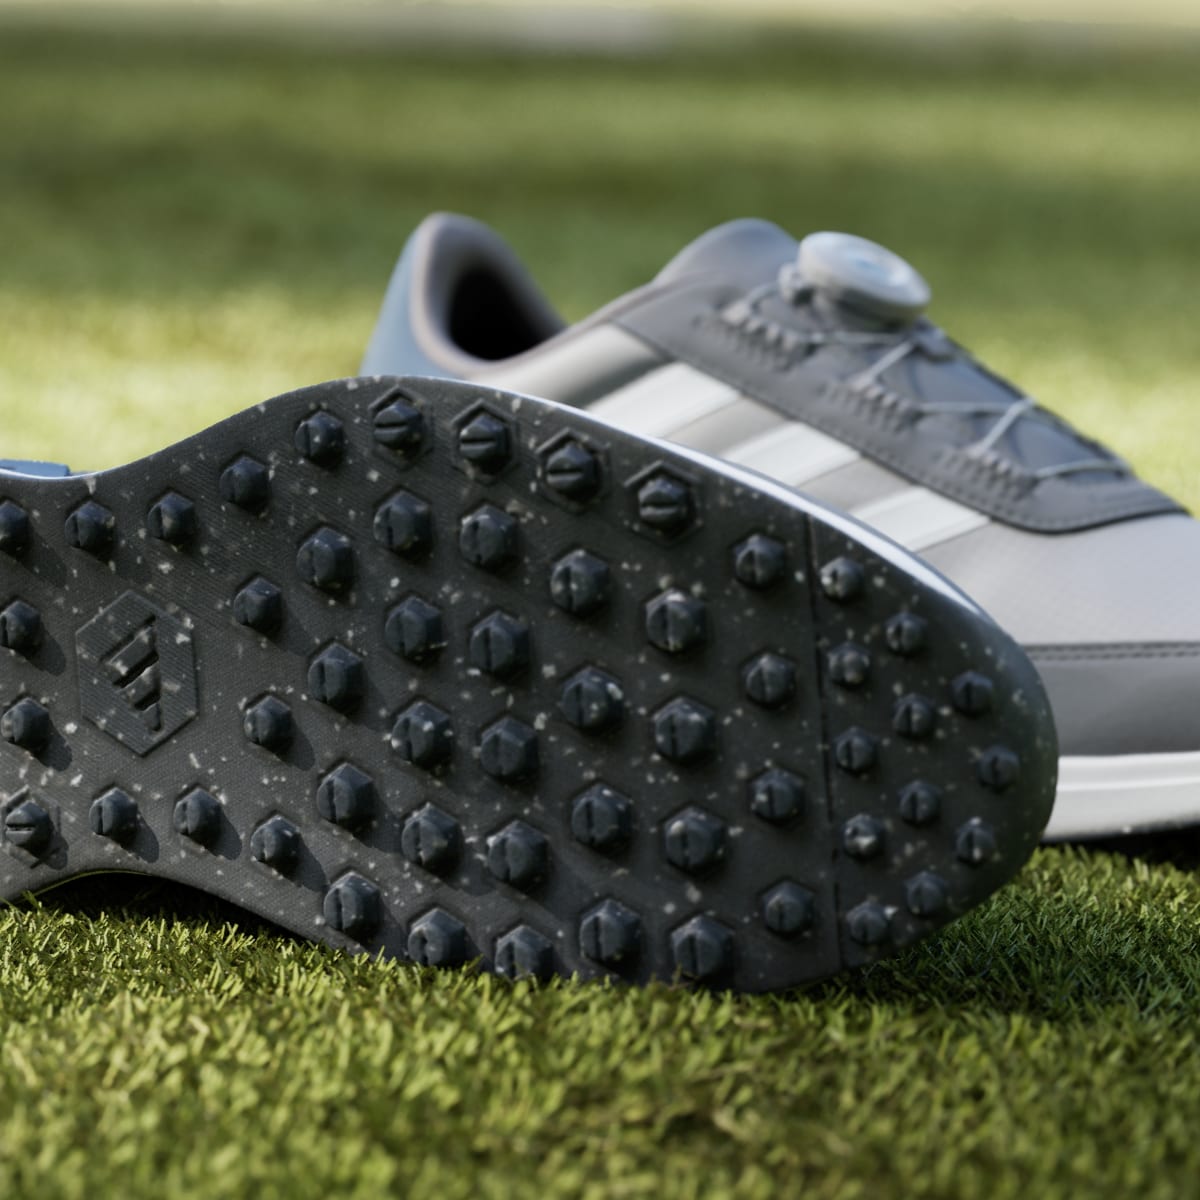 Adidas S2G Spikeless BOA 24 Wide Golf Shoes. 8